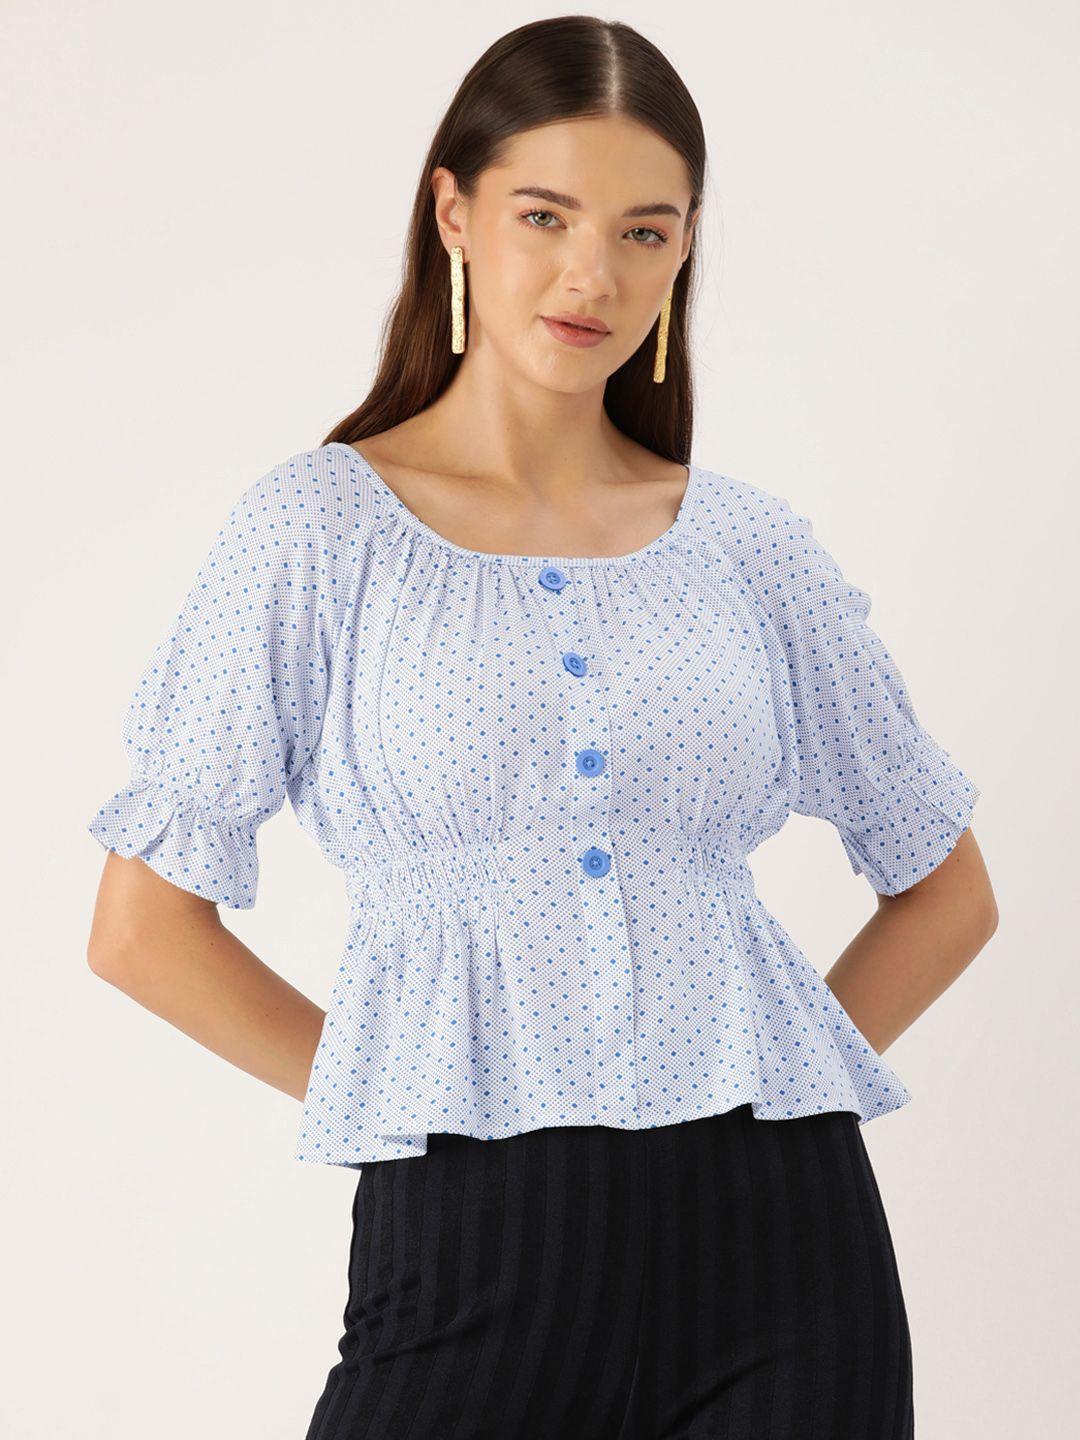 rue collection polka dots print puff sleeves peplum top